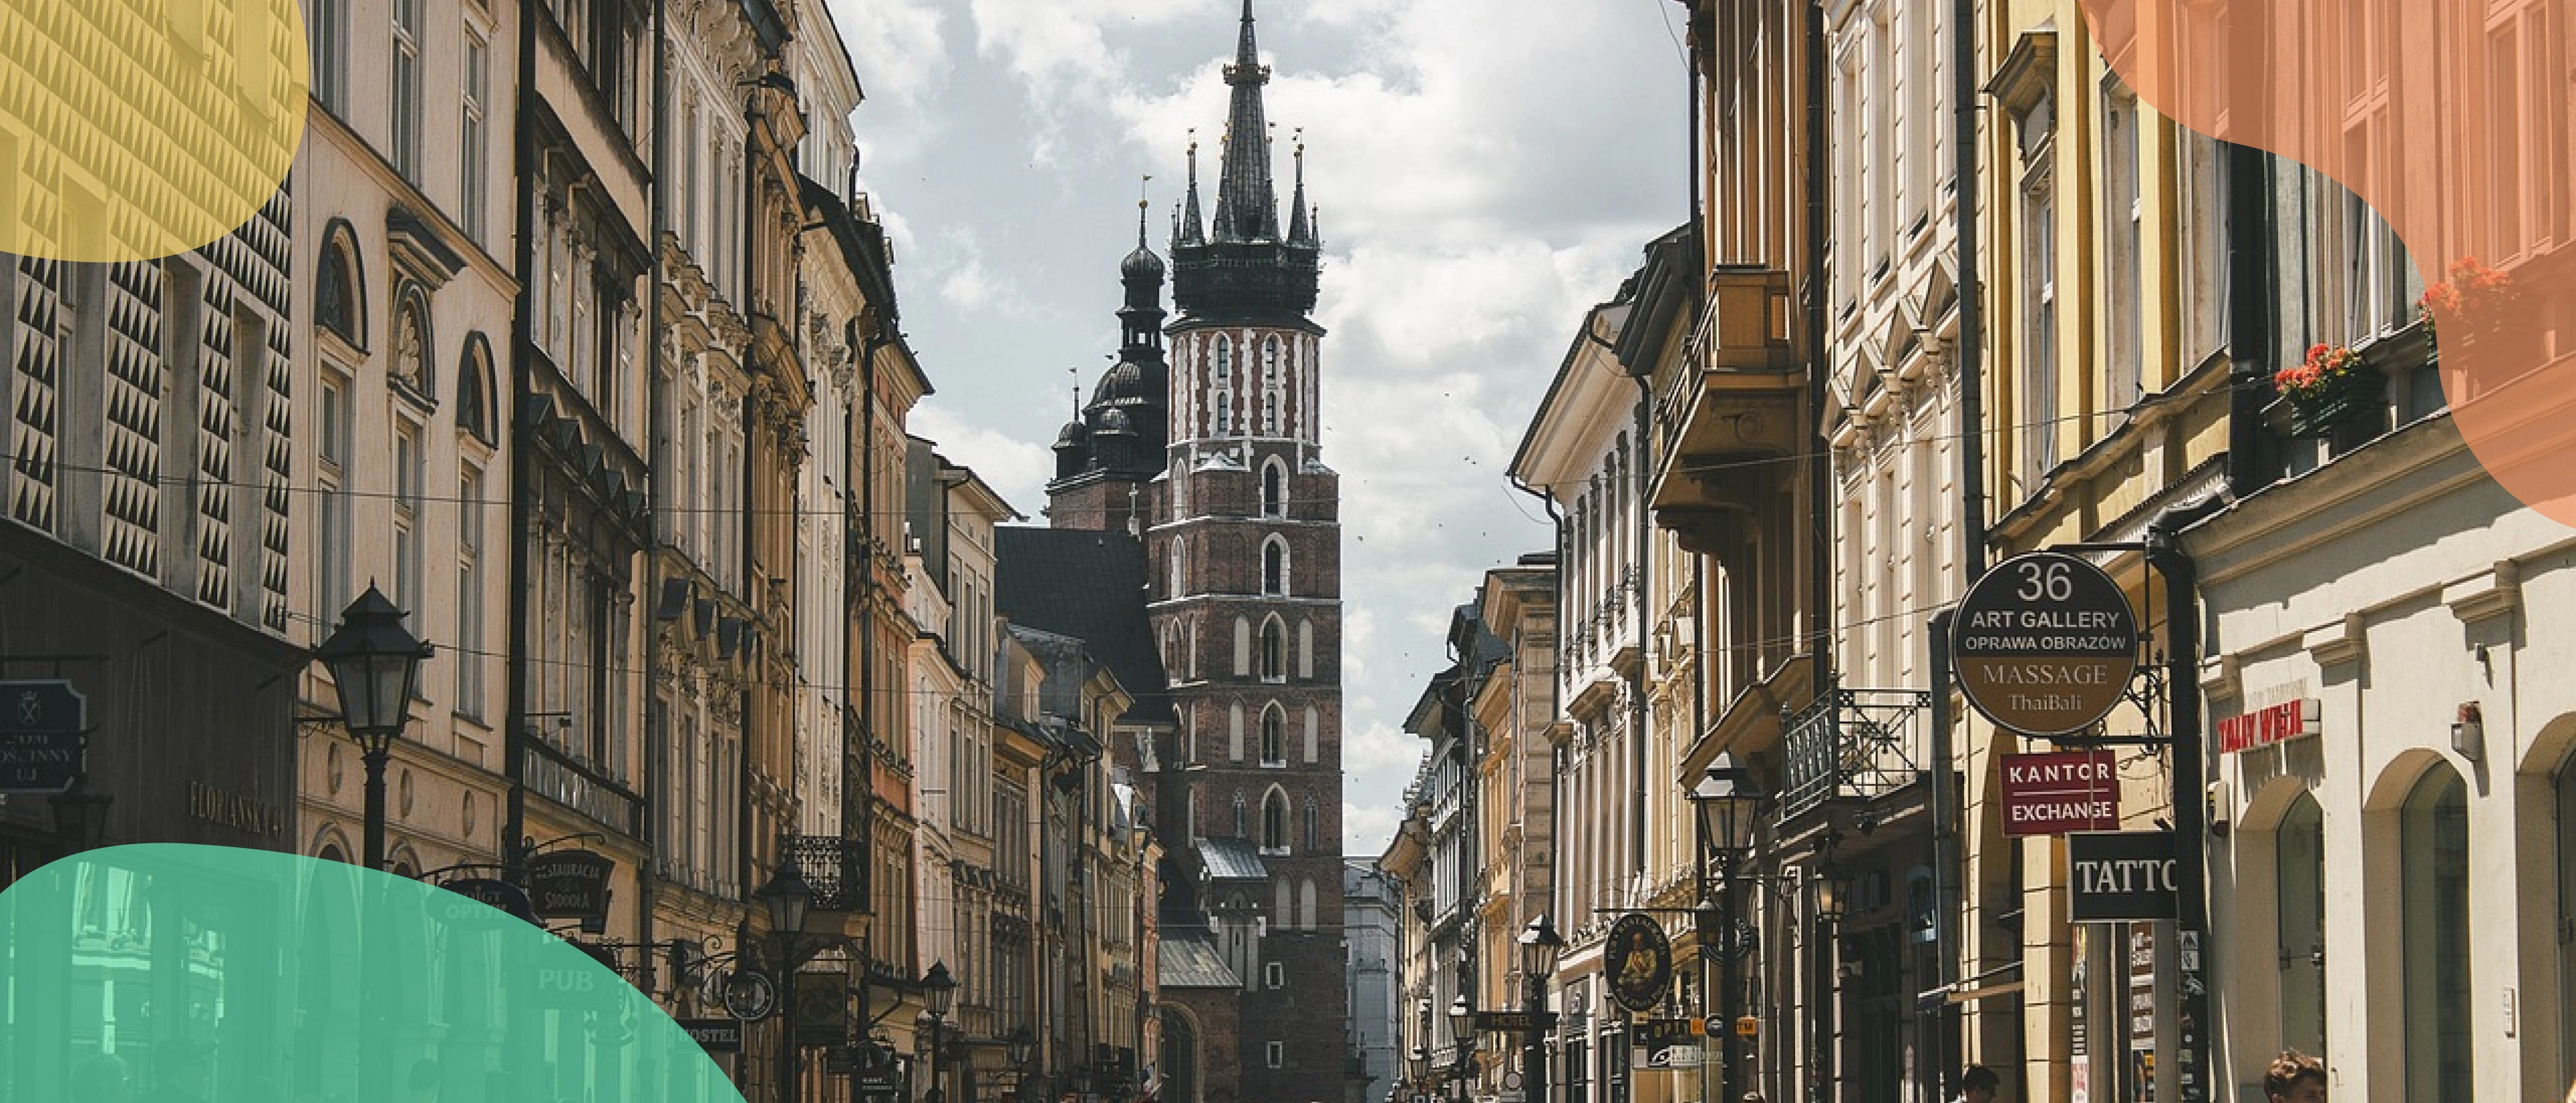 Cracow - Florianska street, a view on the Mariacka Cathedral